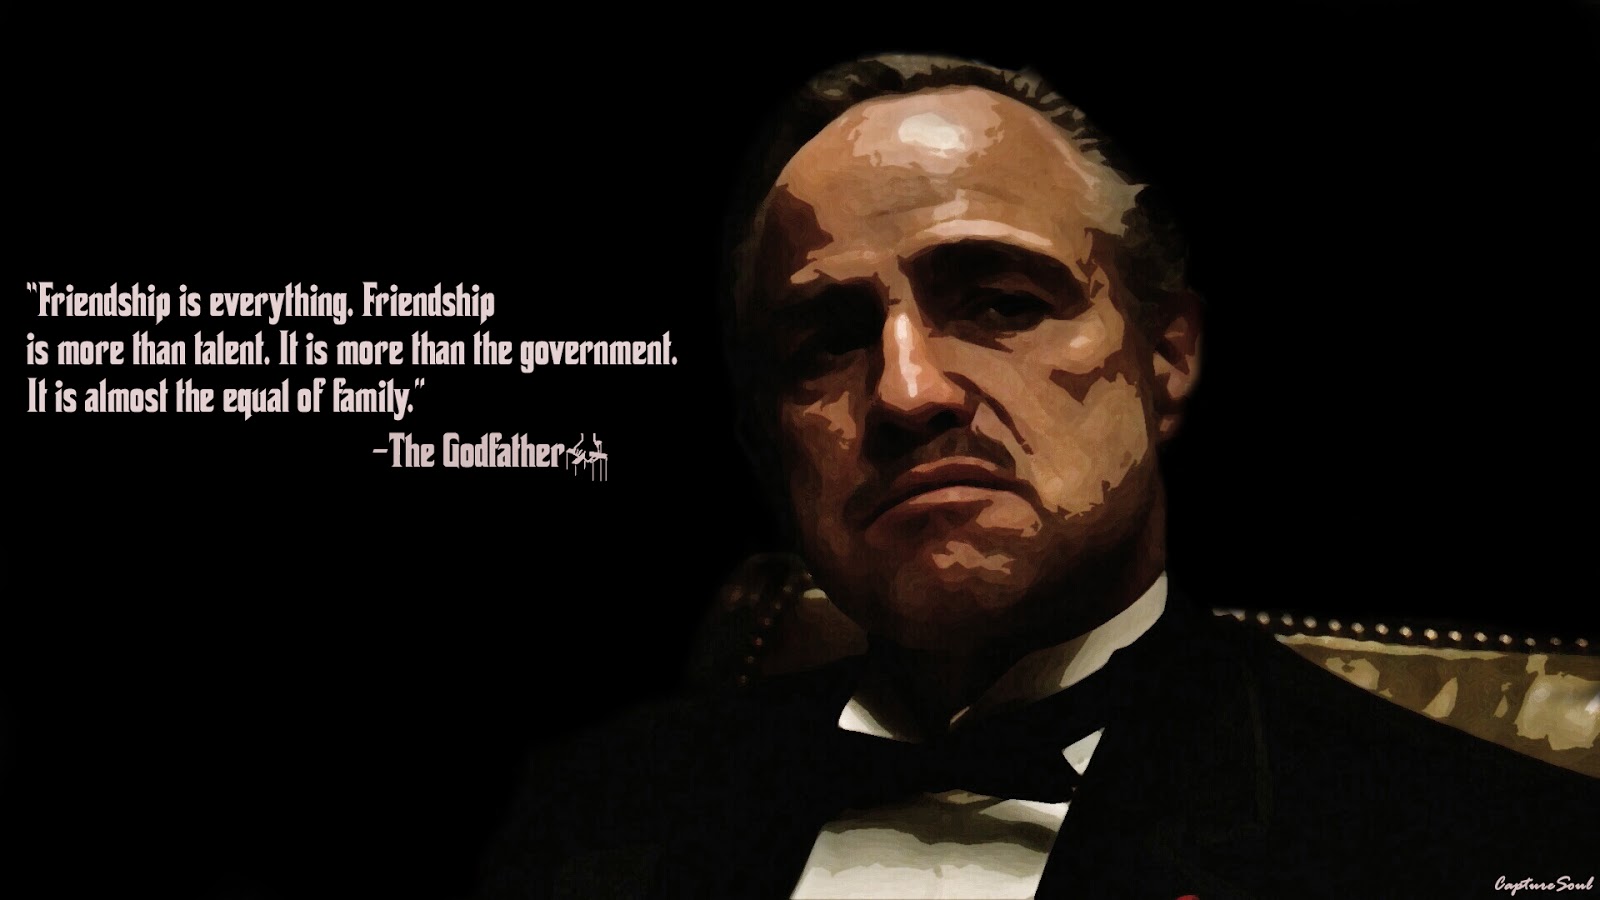 The Godfather Quotes HD Wallpaper